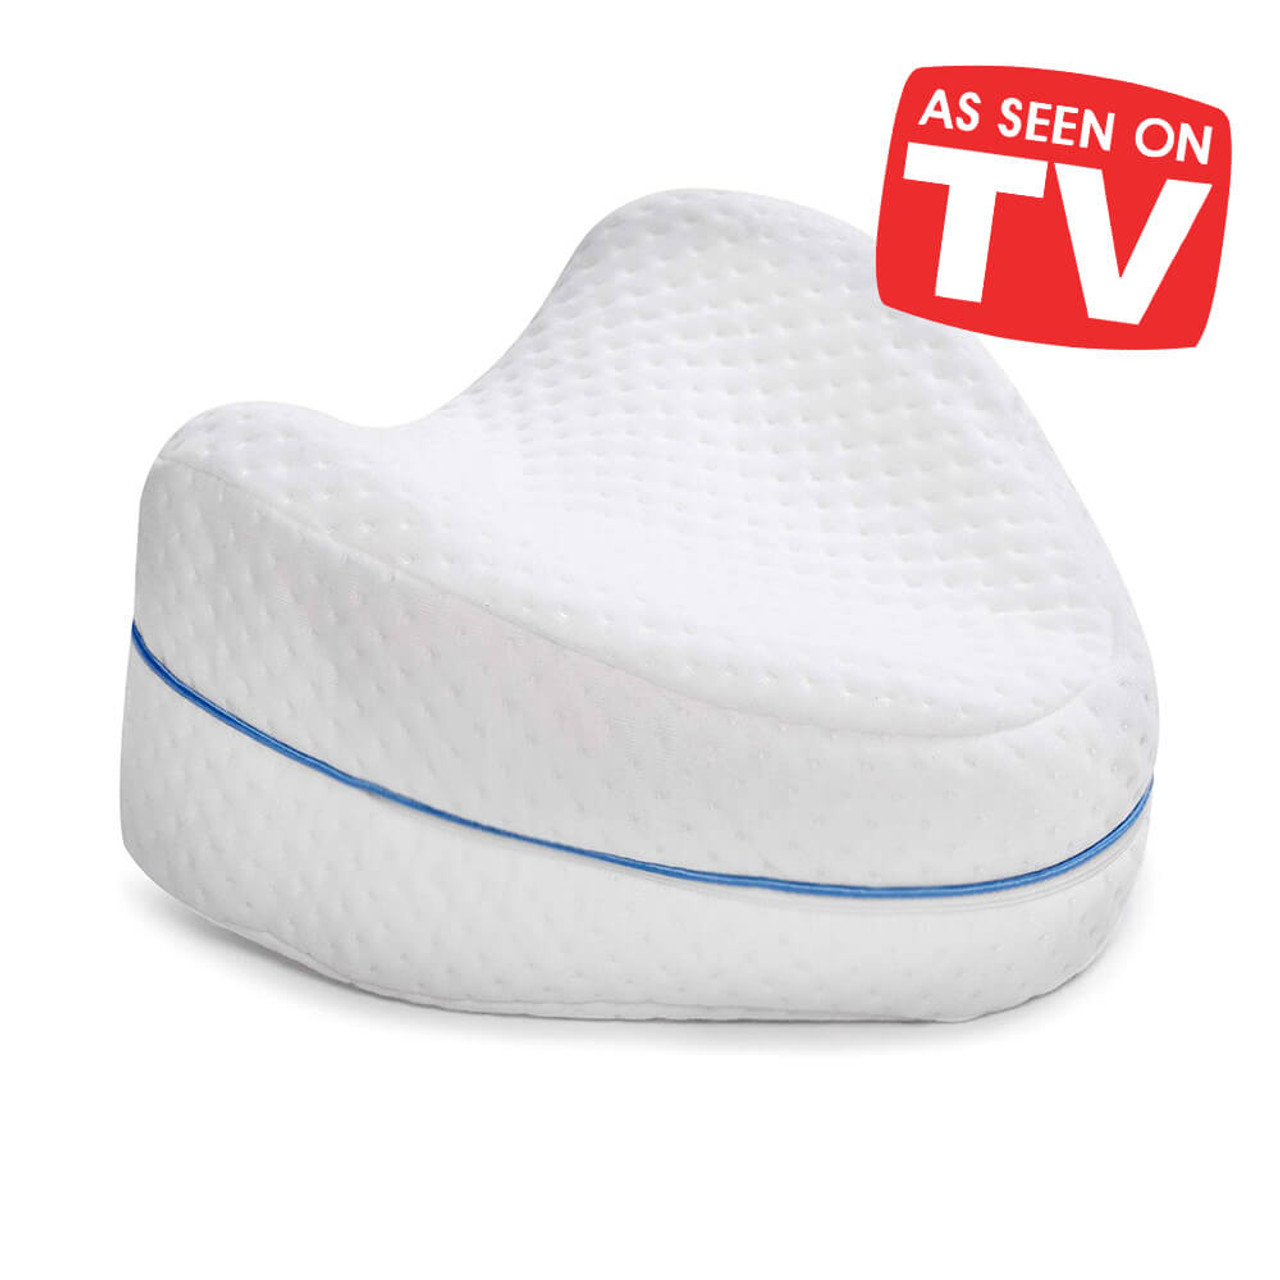 Aeris Knee Pillow for Side Sleepers -%100 Memory Foam Leg Pillow for  Sleeping - Great Between Legs When Sleeping - Helps with Lower Back, Hip